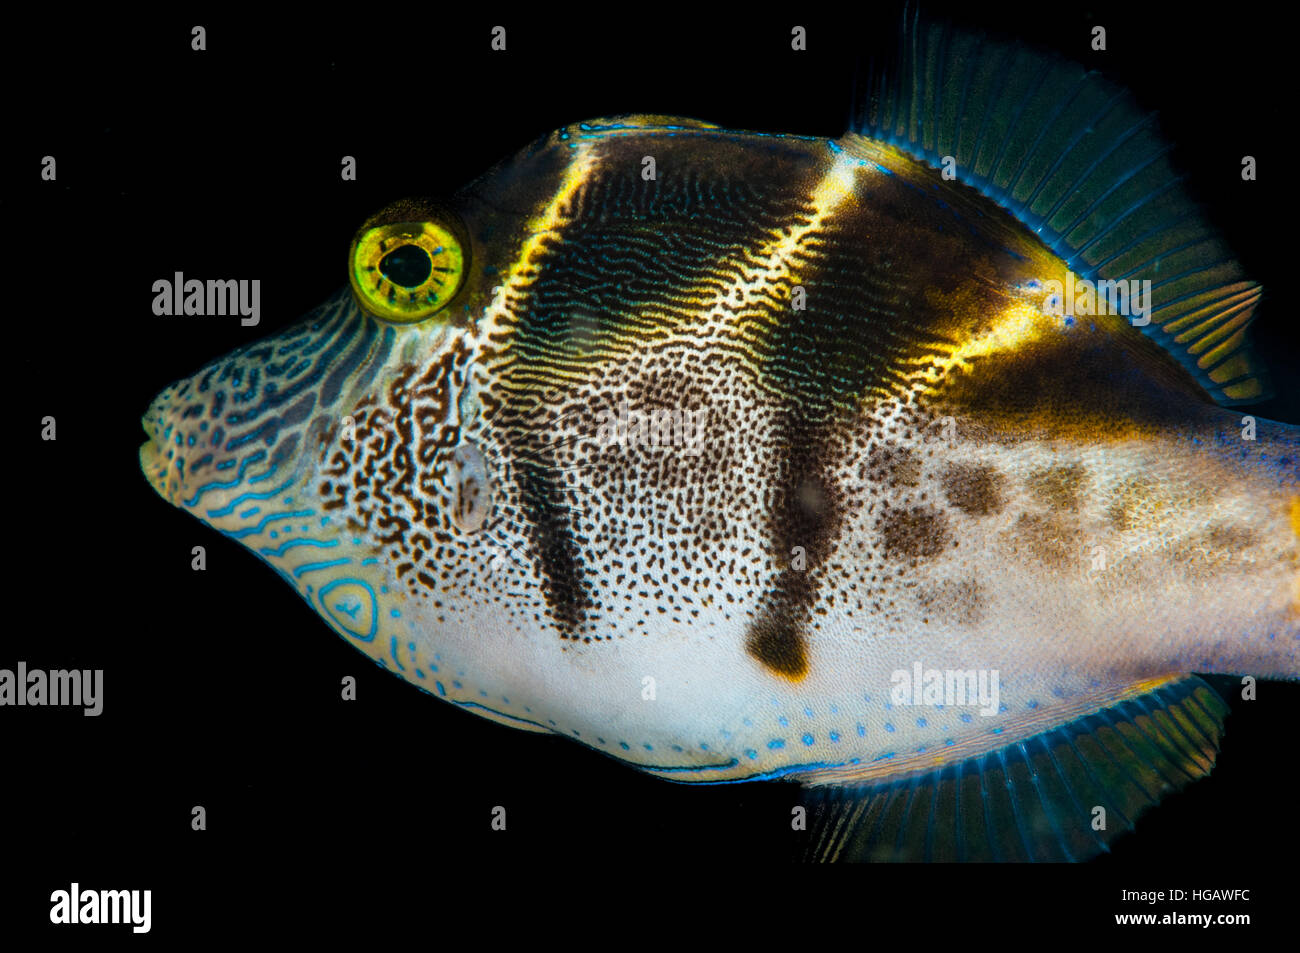 Falso puffer (Paraluteres prionurus), Bali, Indonesia Foto Stock